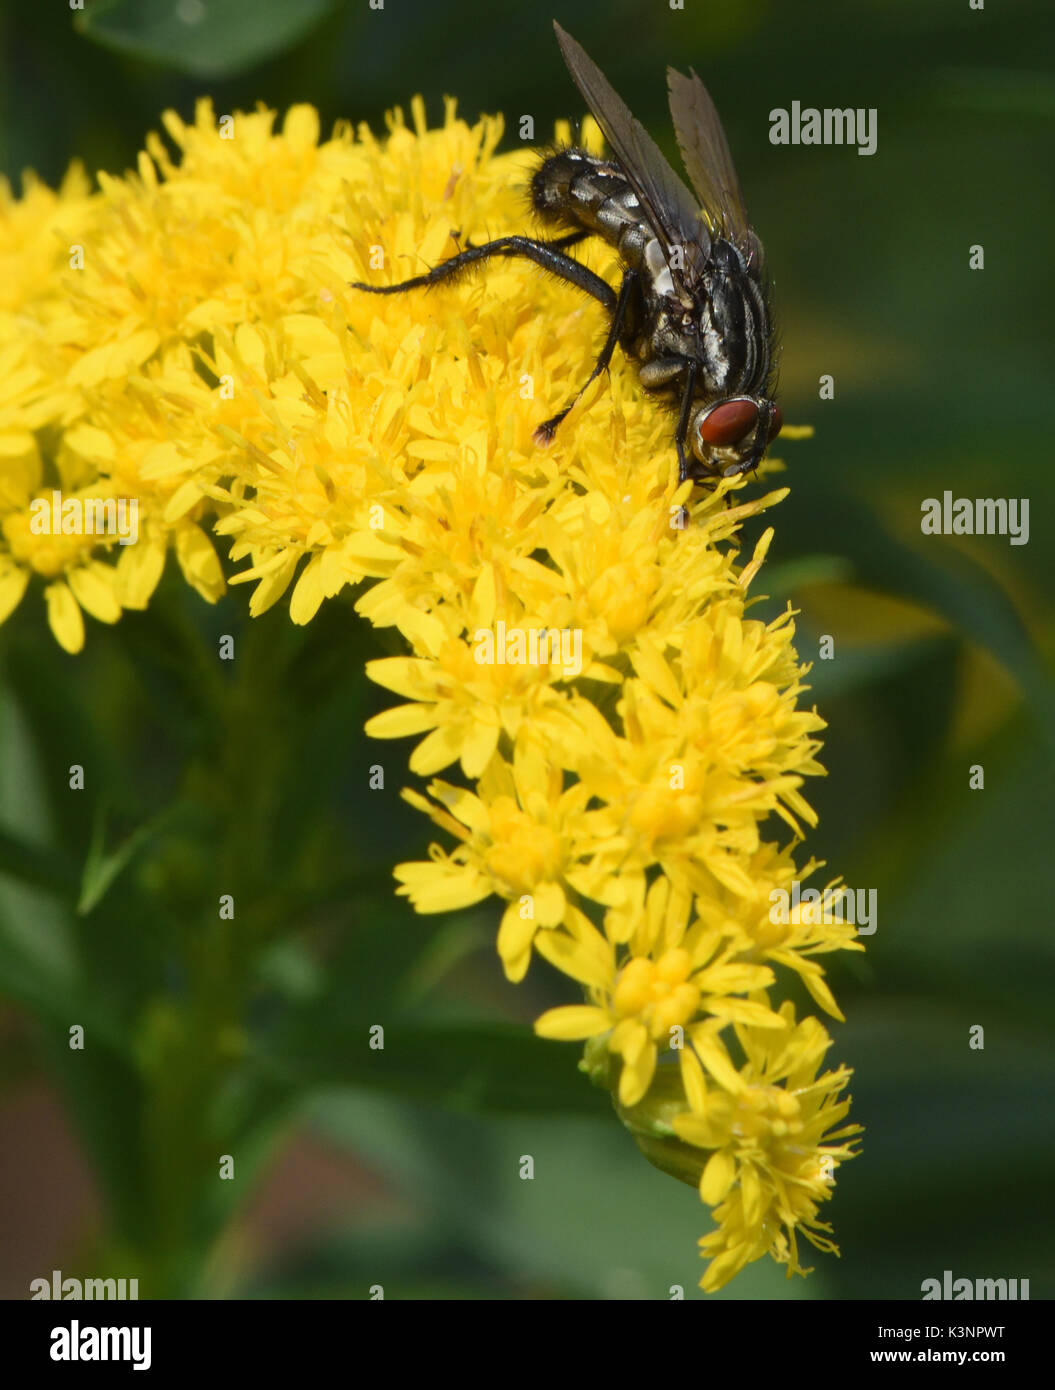 A flesh fly (Sarcophaga species) feeds on a golden rod or solidago flower head. Bedgebury Forest, Kent, UK. Stock Photo